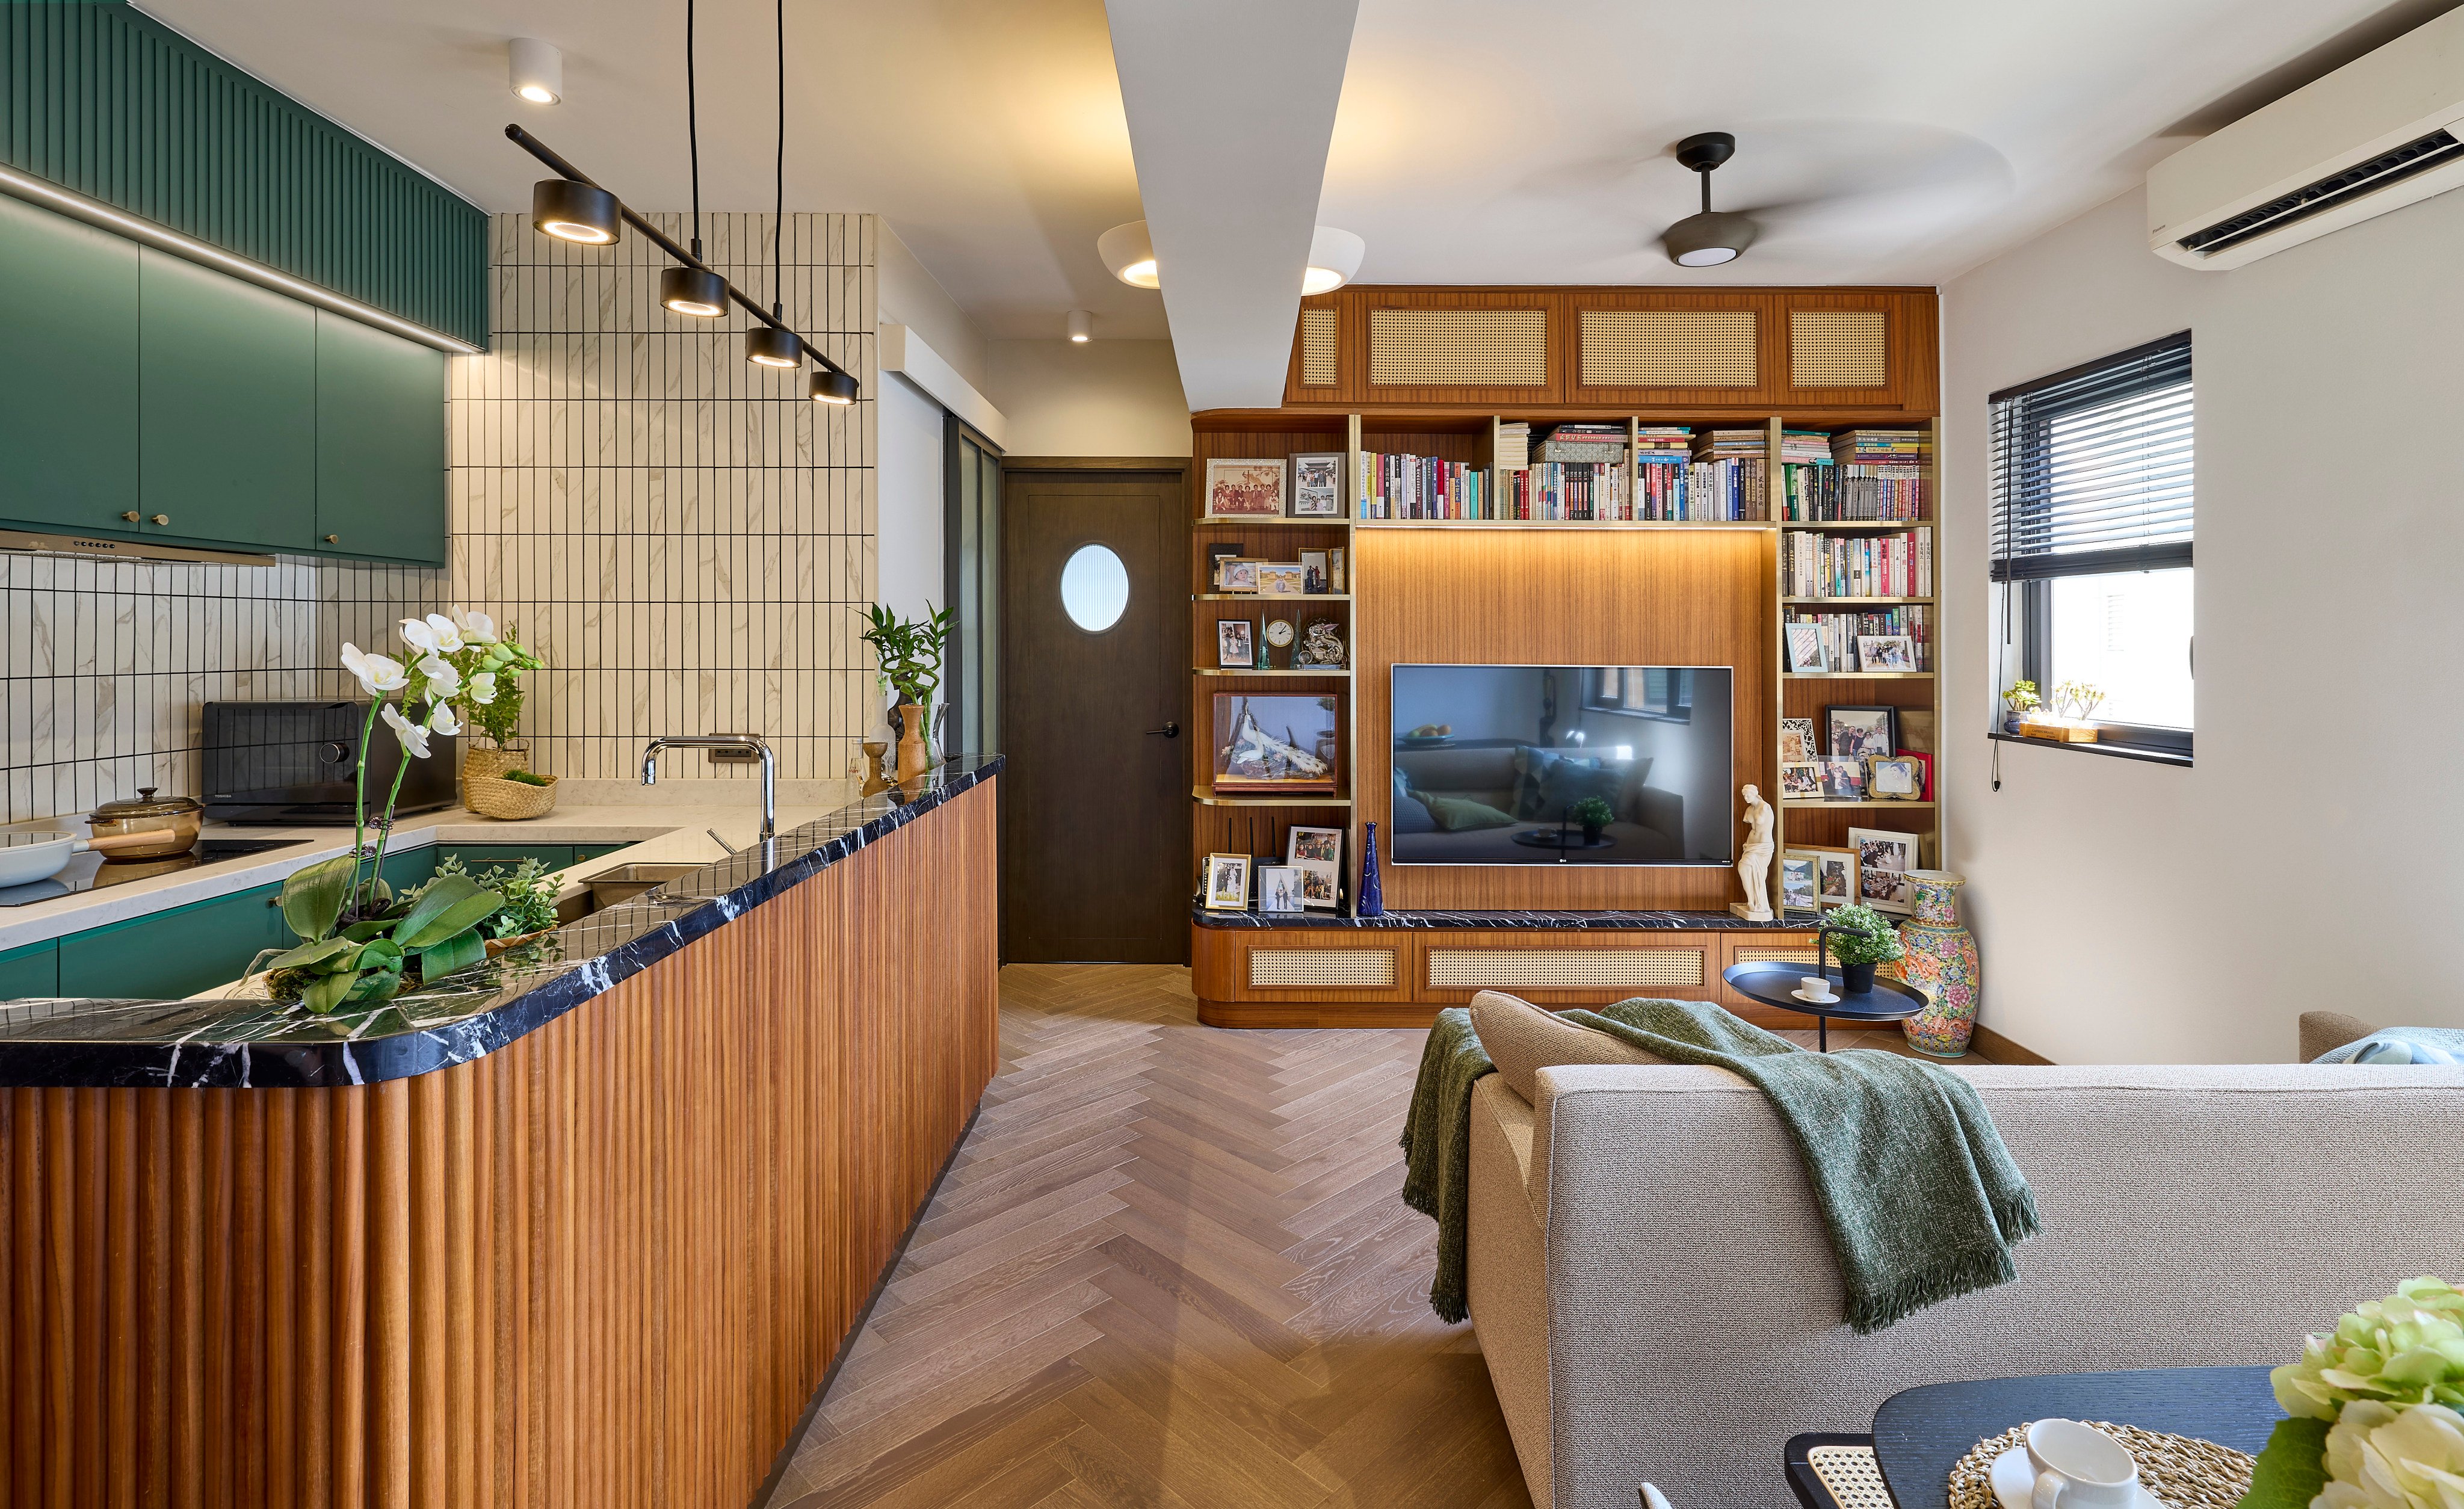 A 510 sq ft retirement apartment in Hong Kong’s Tai Hang neighbourhood has been given a Bauhaus-inspired renovation that will allow its mature occupants to age in place – and comfort. Photo: Michael Perini